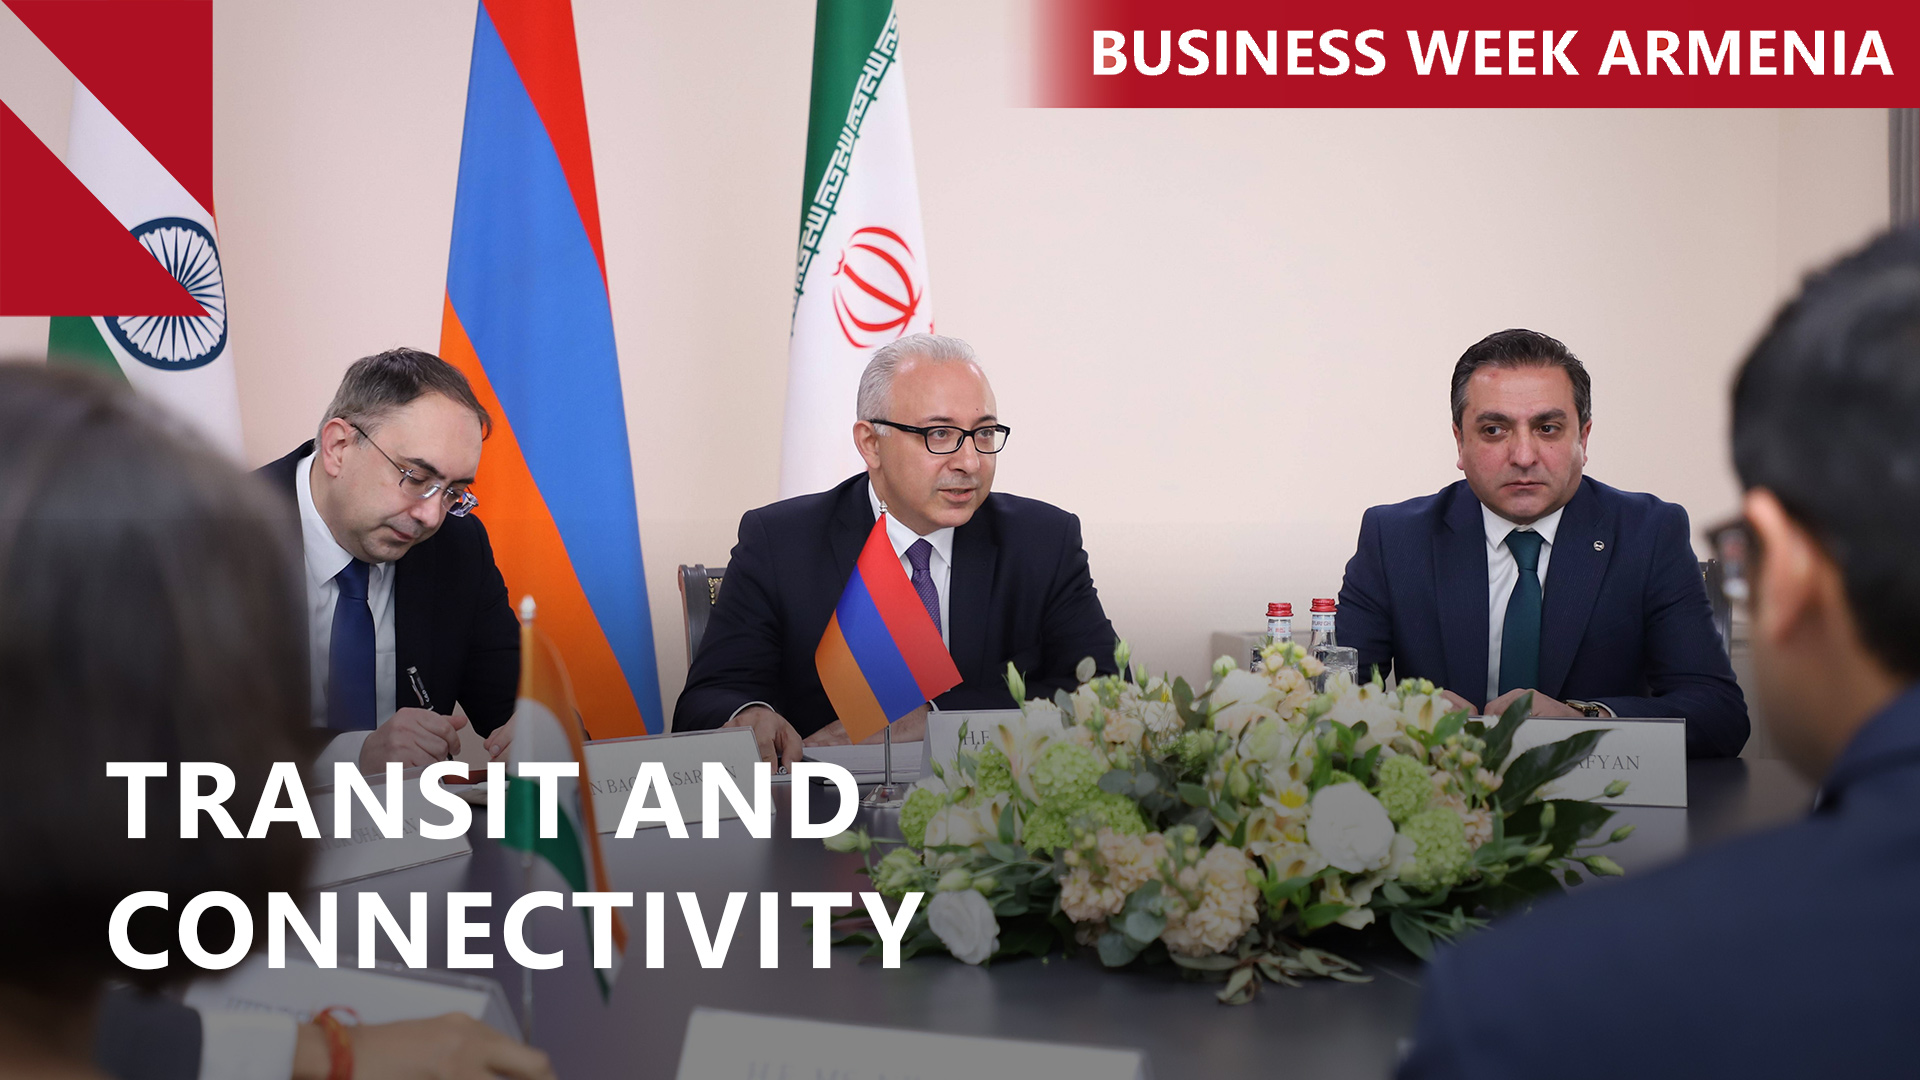 Iran and India push for trade route through Armenia: THIS WEEK IN BUSINESS